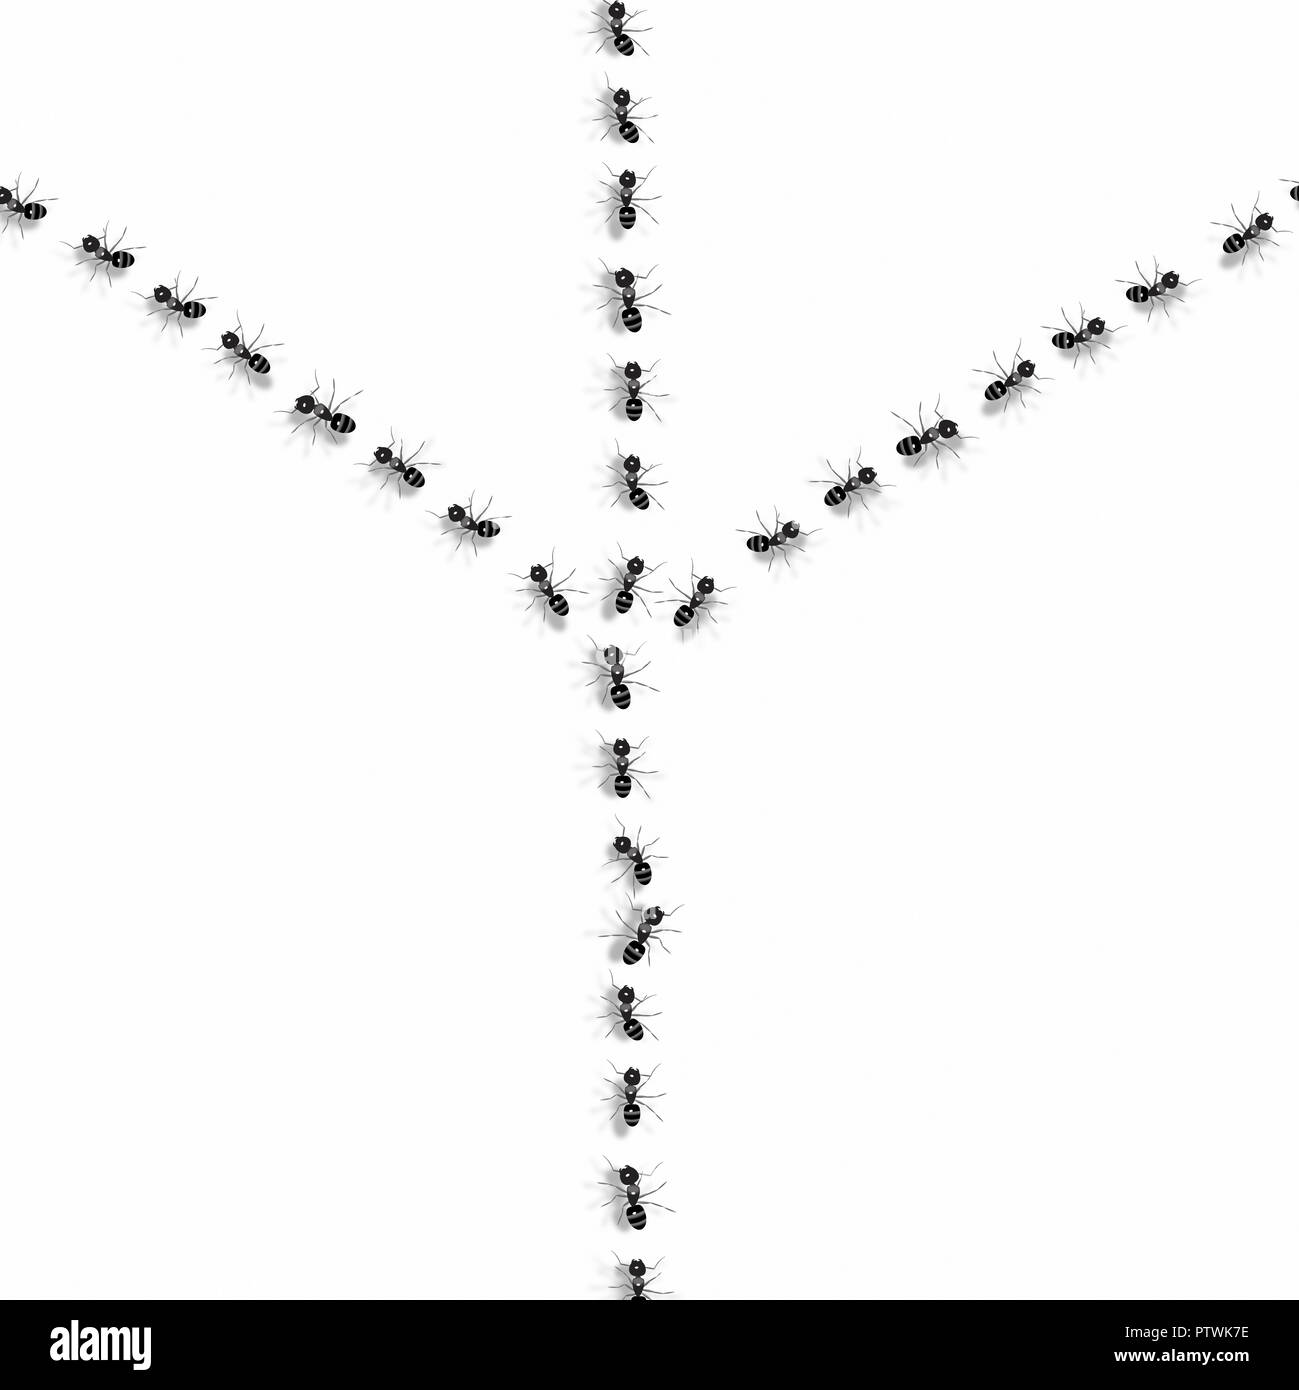 Ants walking in different directions and making lines against white background Stock Photo